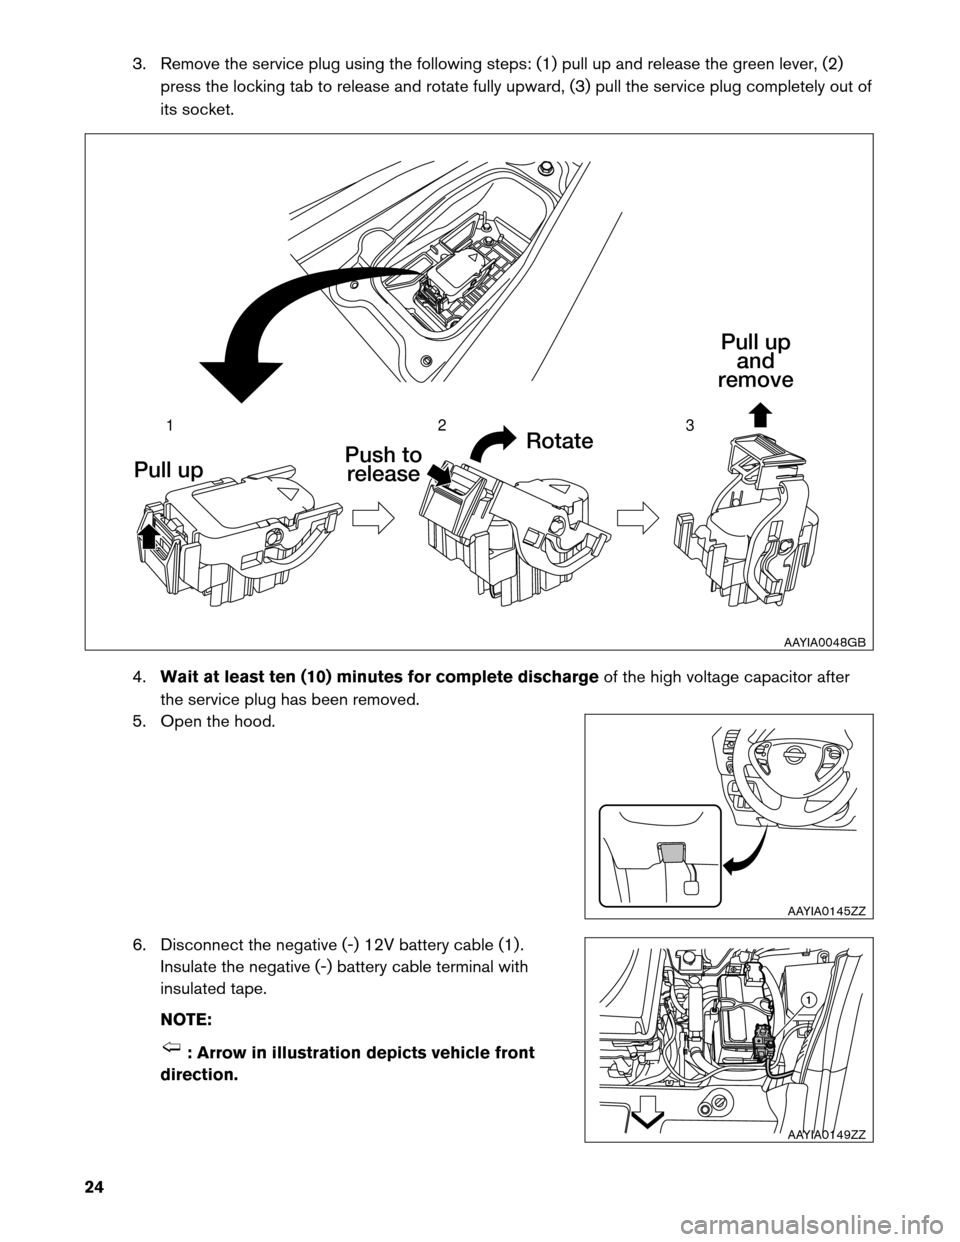 NISSAN LEAF 2013 1.G First Responders Guide 3. Remove the service plug using the following steps: (1) pull up and release the green lever, (2)
press the locking tab to release and rotate fully upward, (3) pull the service plug completely out of